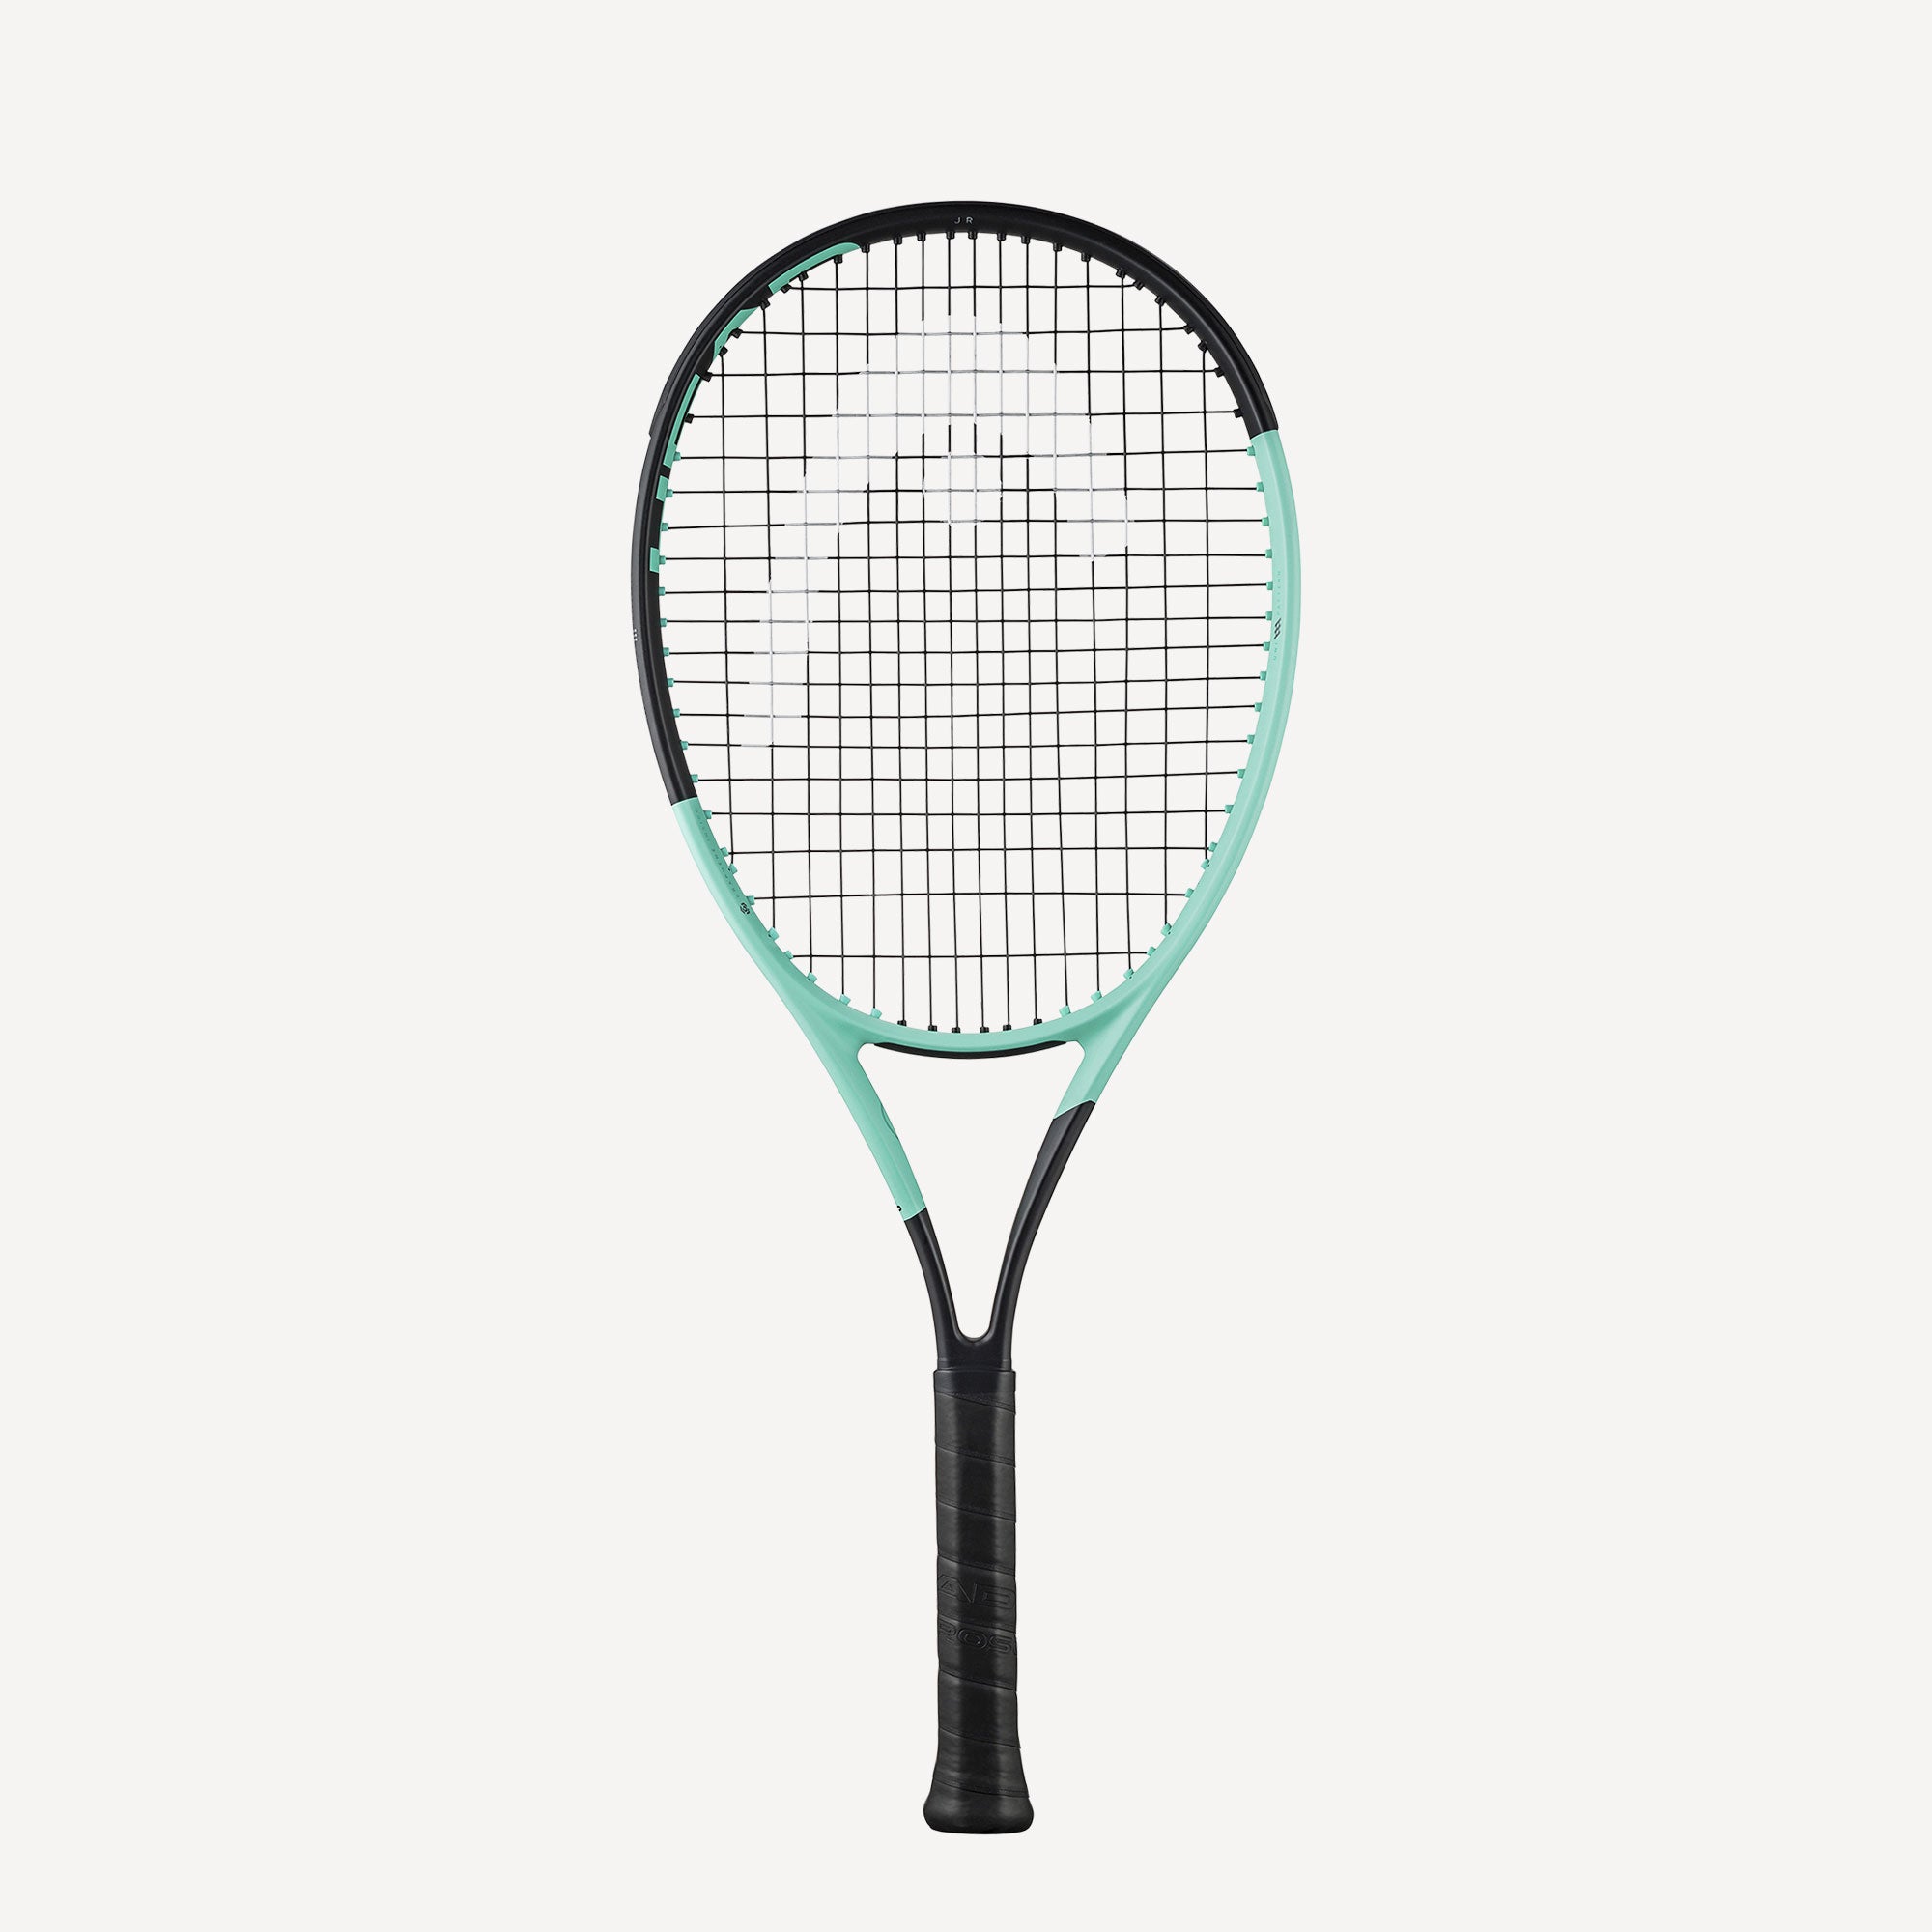 New Tennis Equipment - Rackets, Bags, Strings & Accessories 